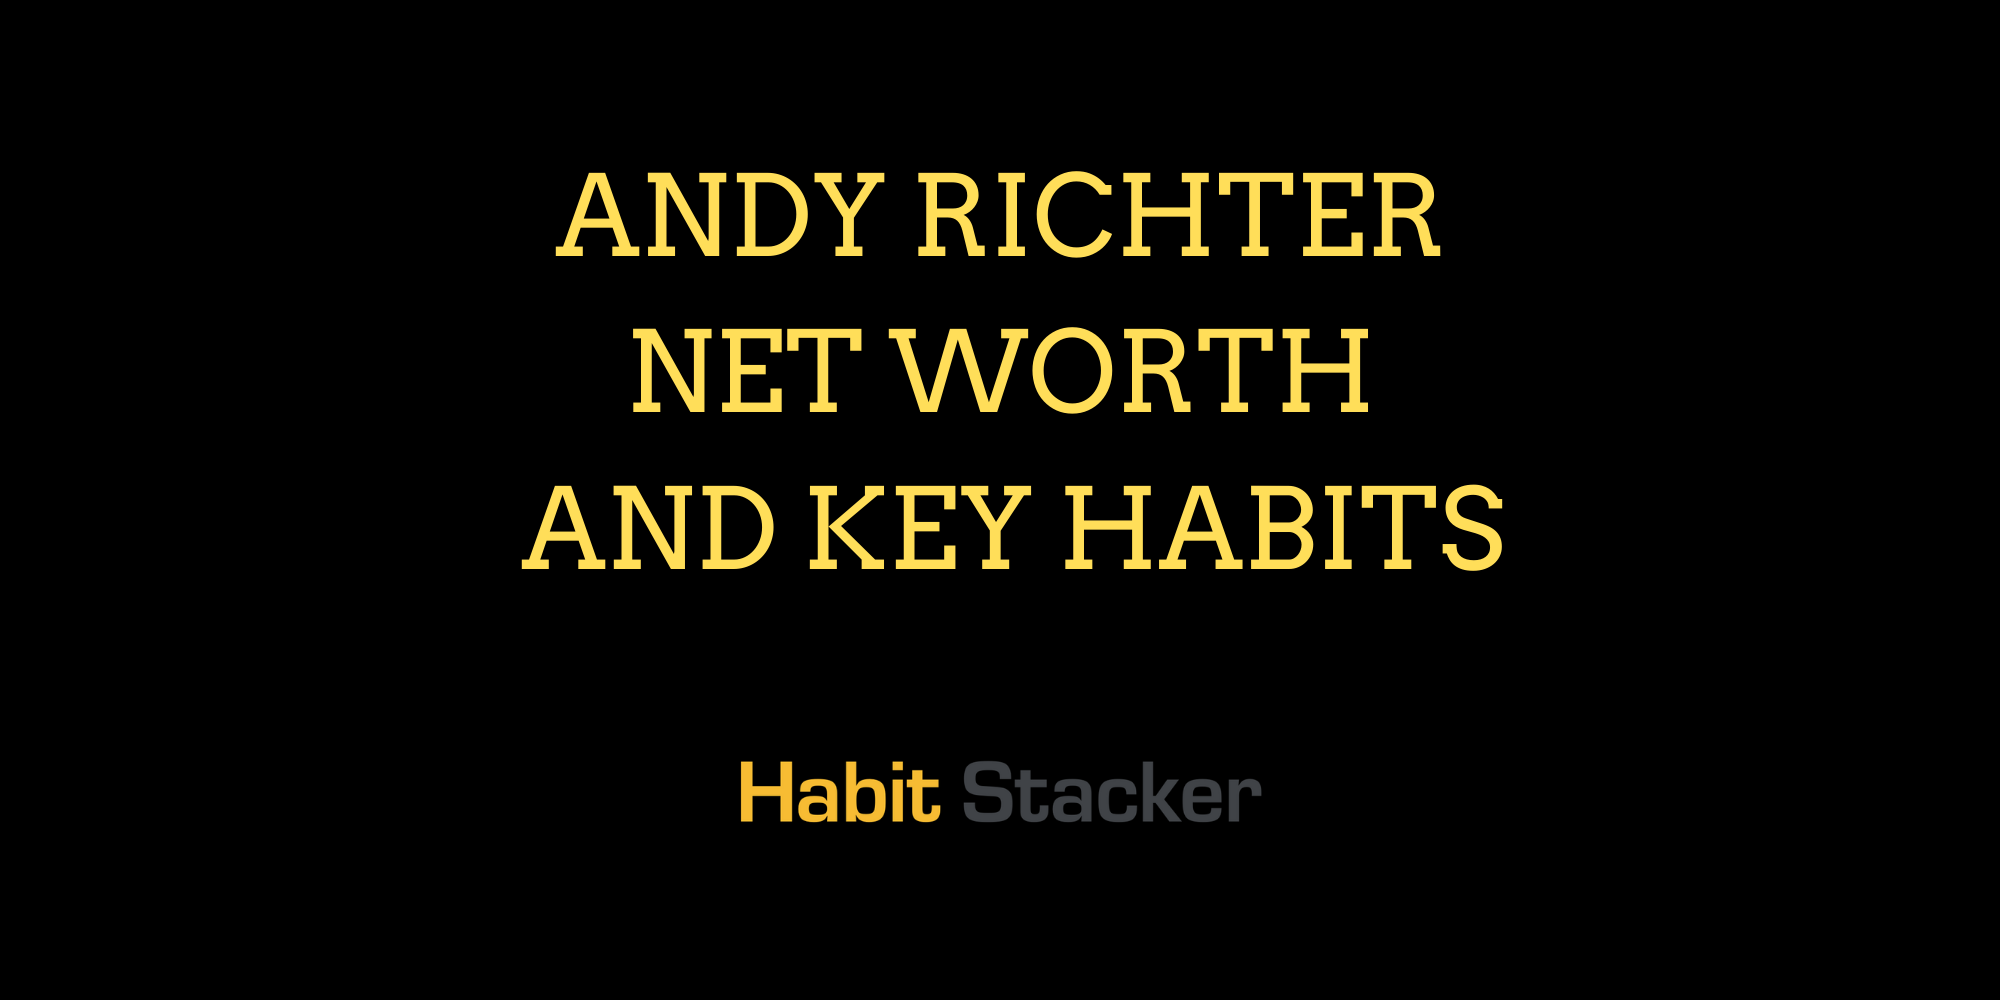 Andy Richter Net Worth and Key Habits